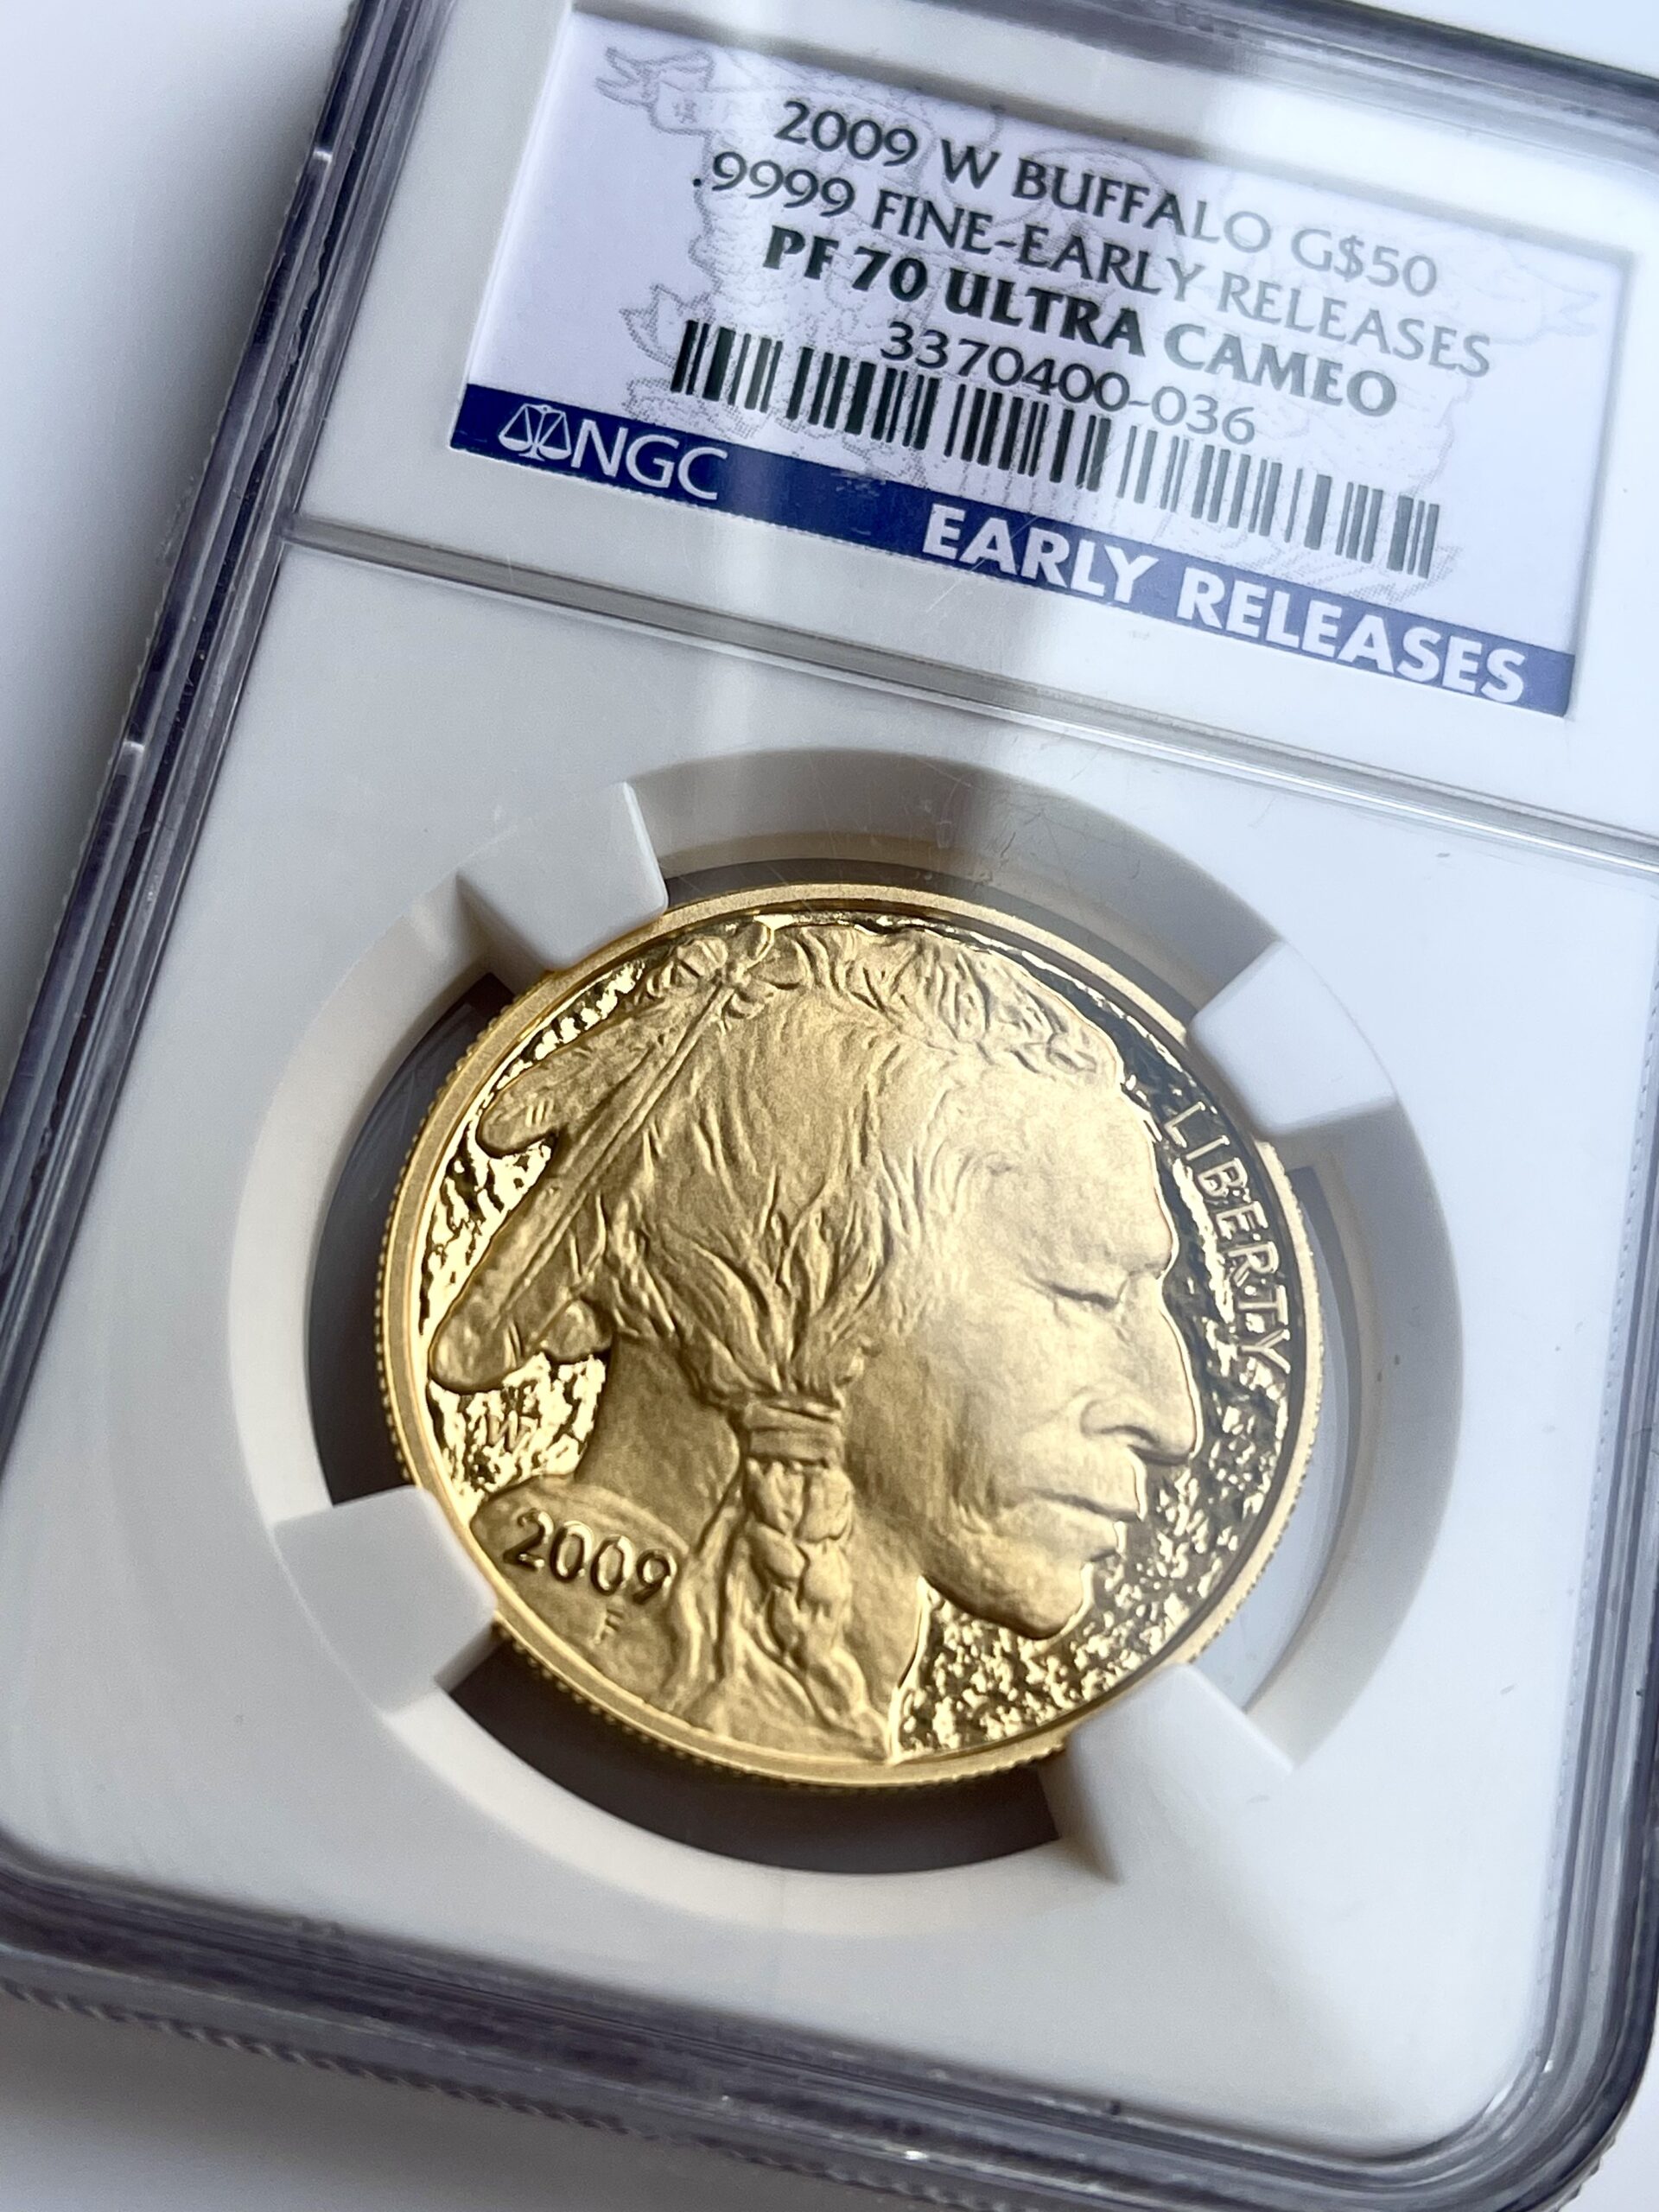 USA American Buffalo Gold 2009 proof early releases NGC PF70 UCAM